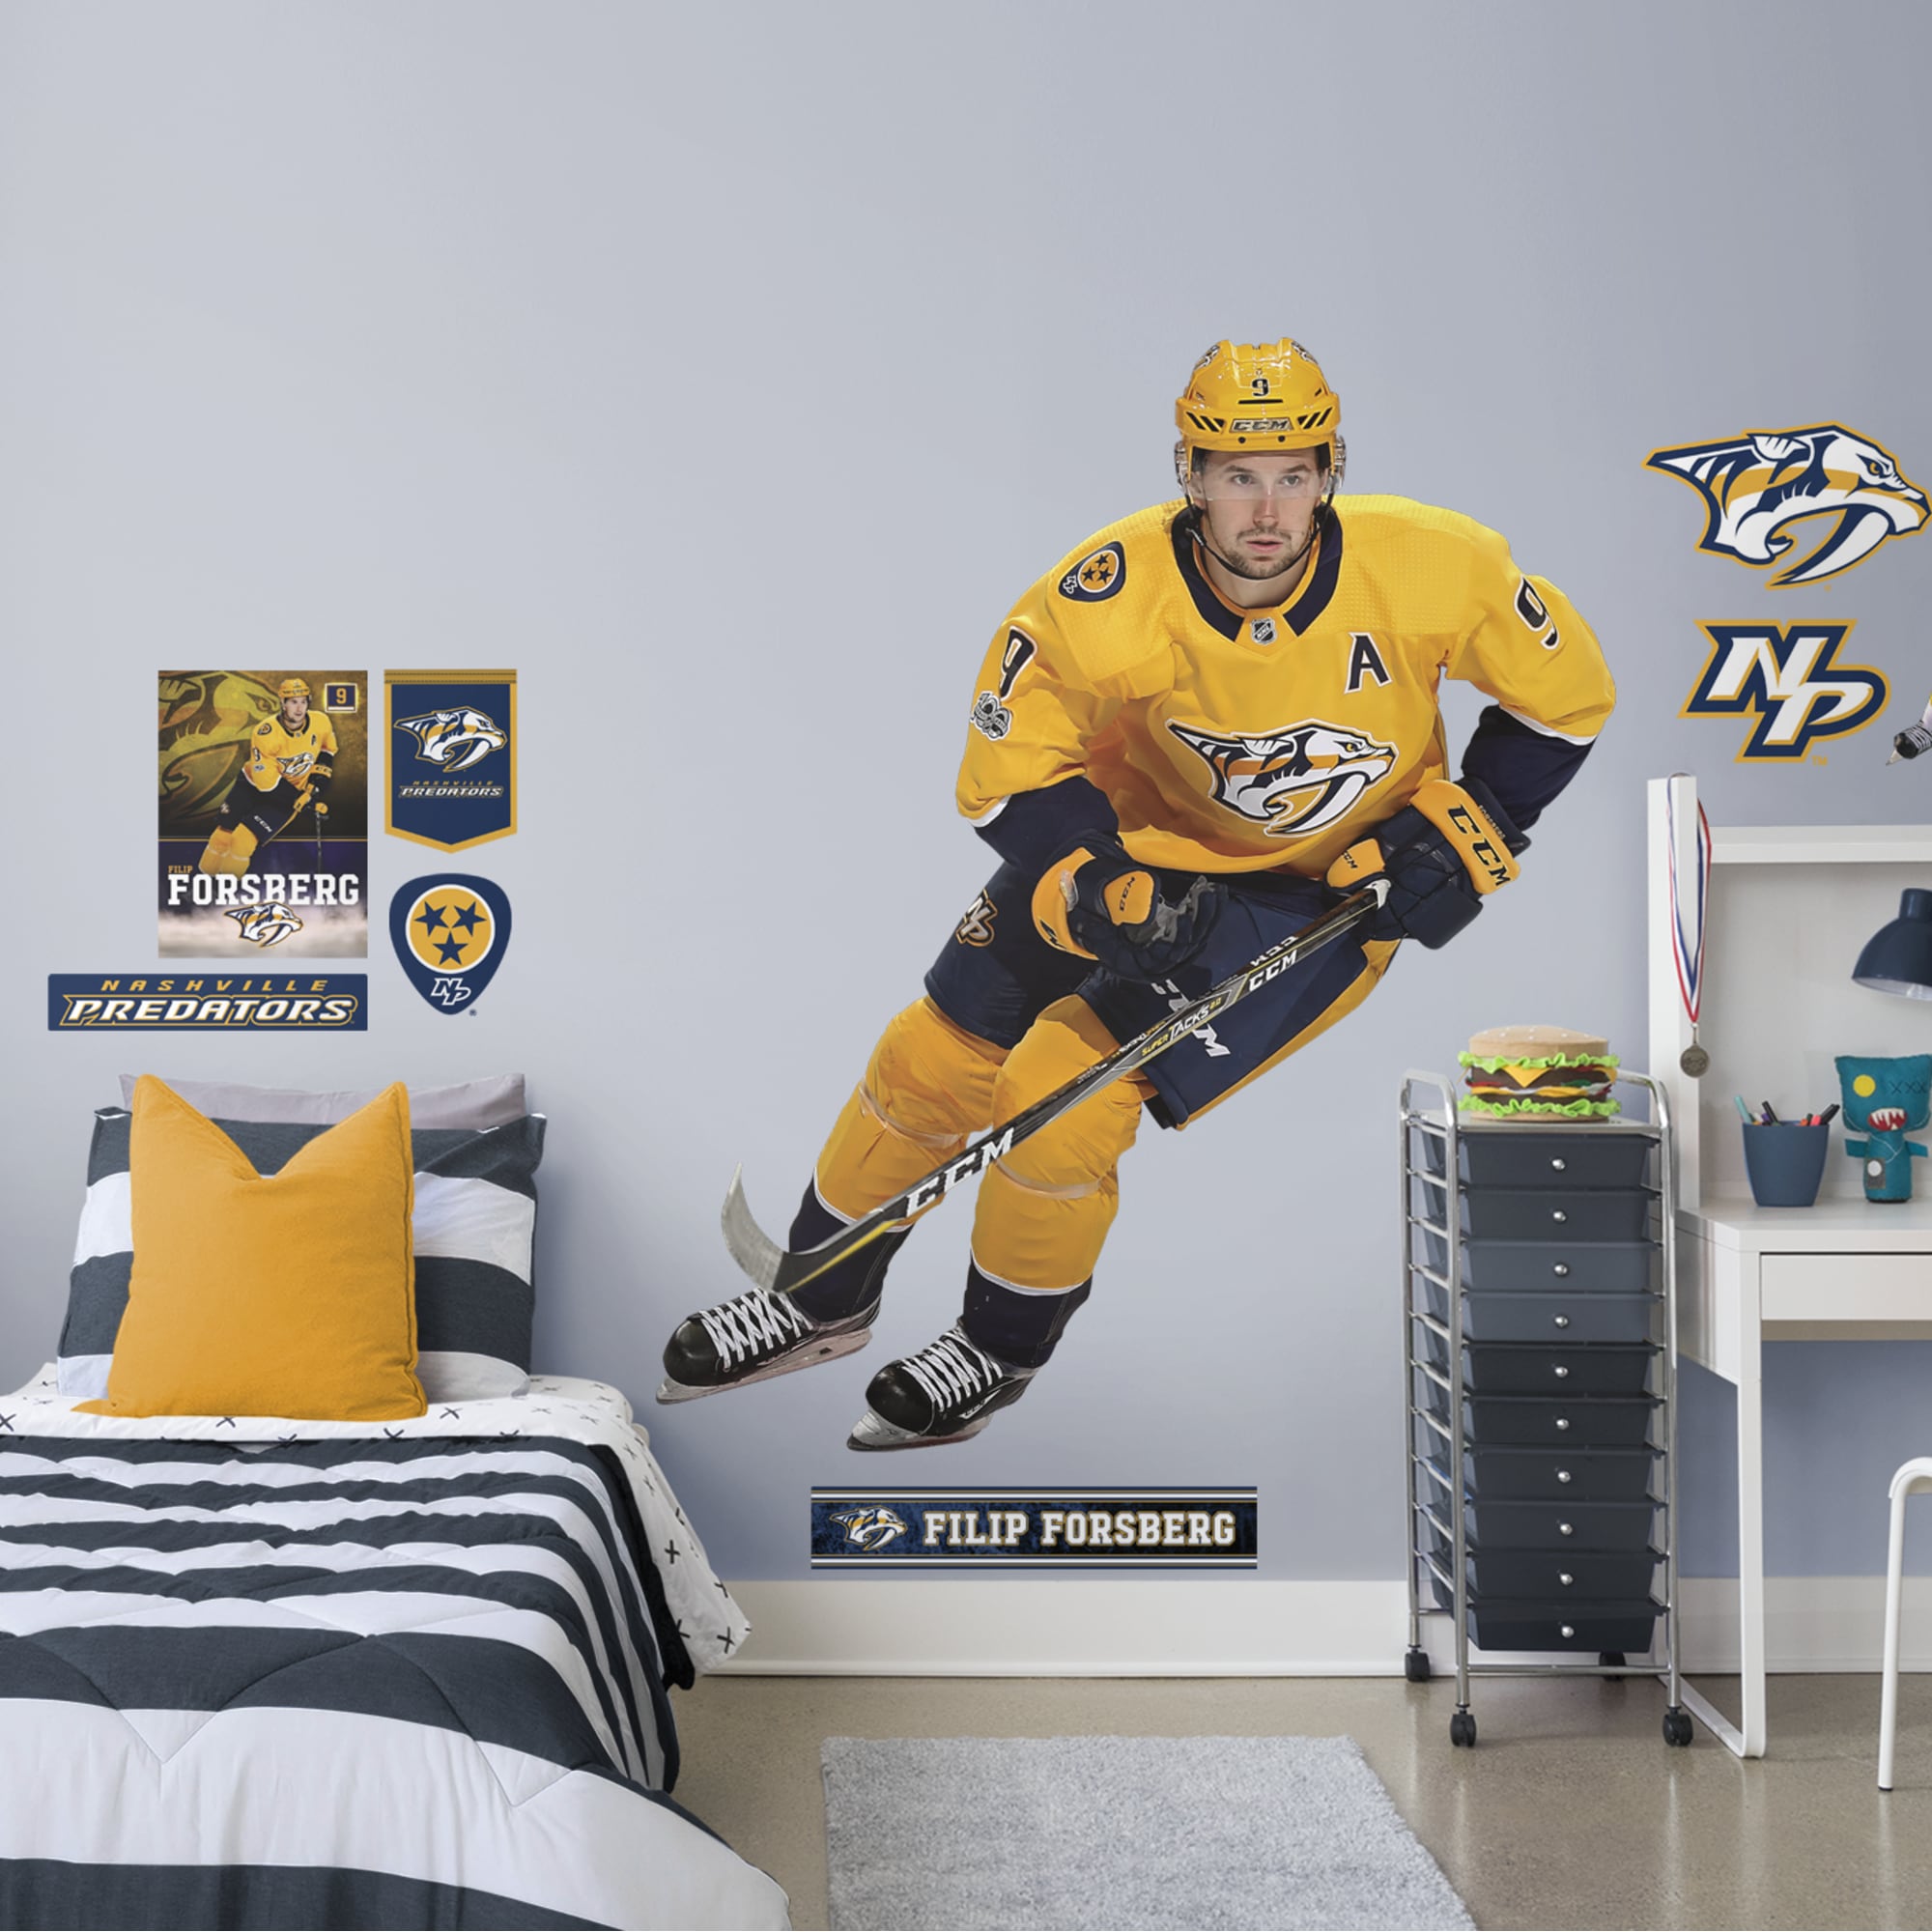 Filip Forsberg for Nashville Predators - Officially Licensed NHL Removable Wall Decal Life-Size Athlete + 9 Decals (61"W x 71"H)